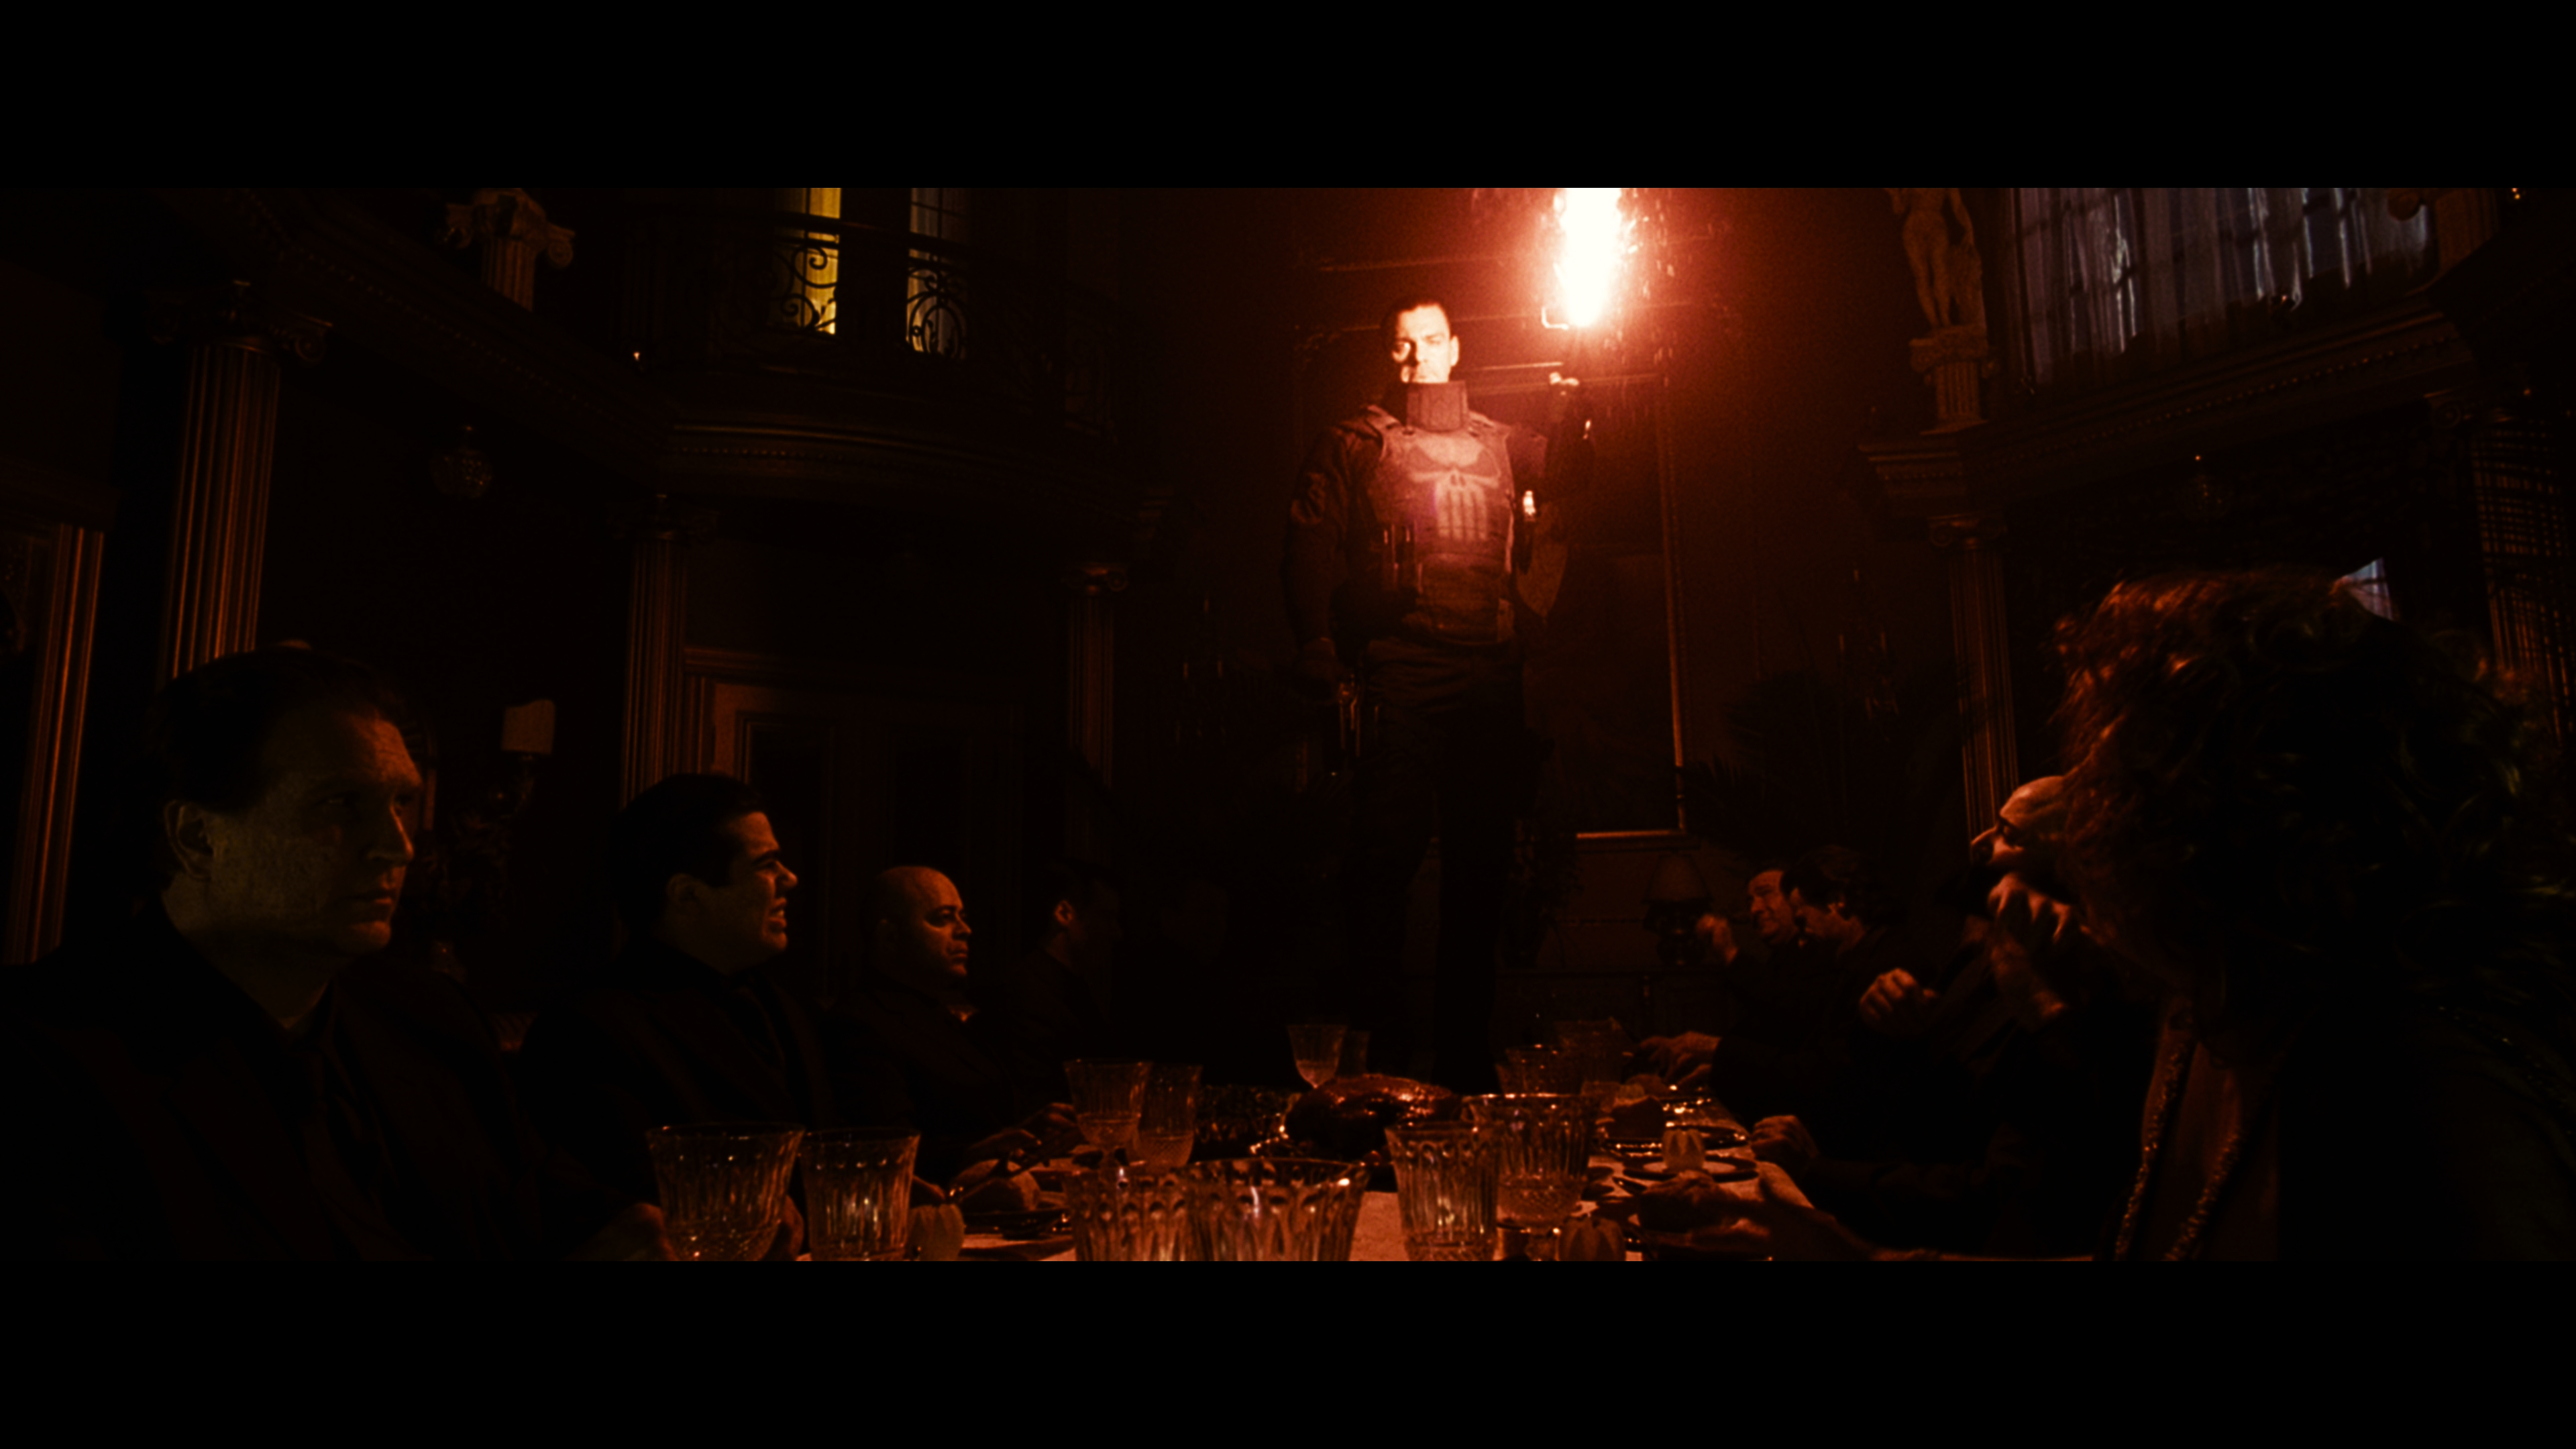 Lionsgate Readies a Best Buy 4K UHD Steel Book Release for PUNISHER: WAR  ZONE! – ACTION-FLIX